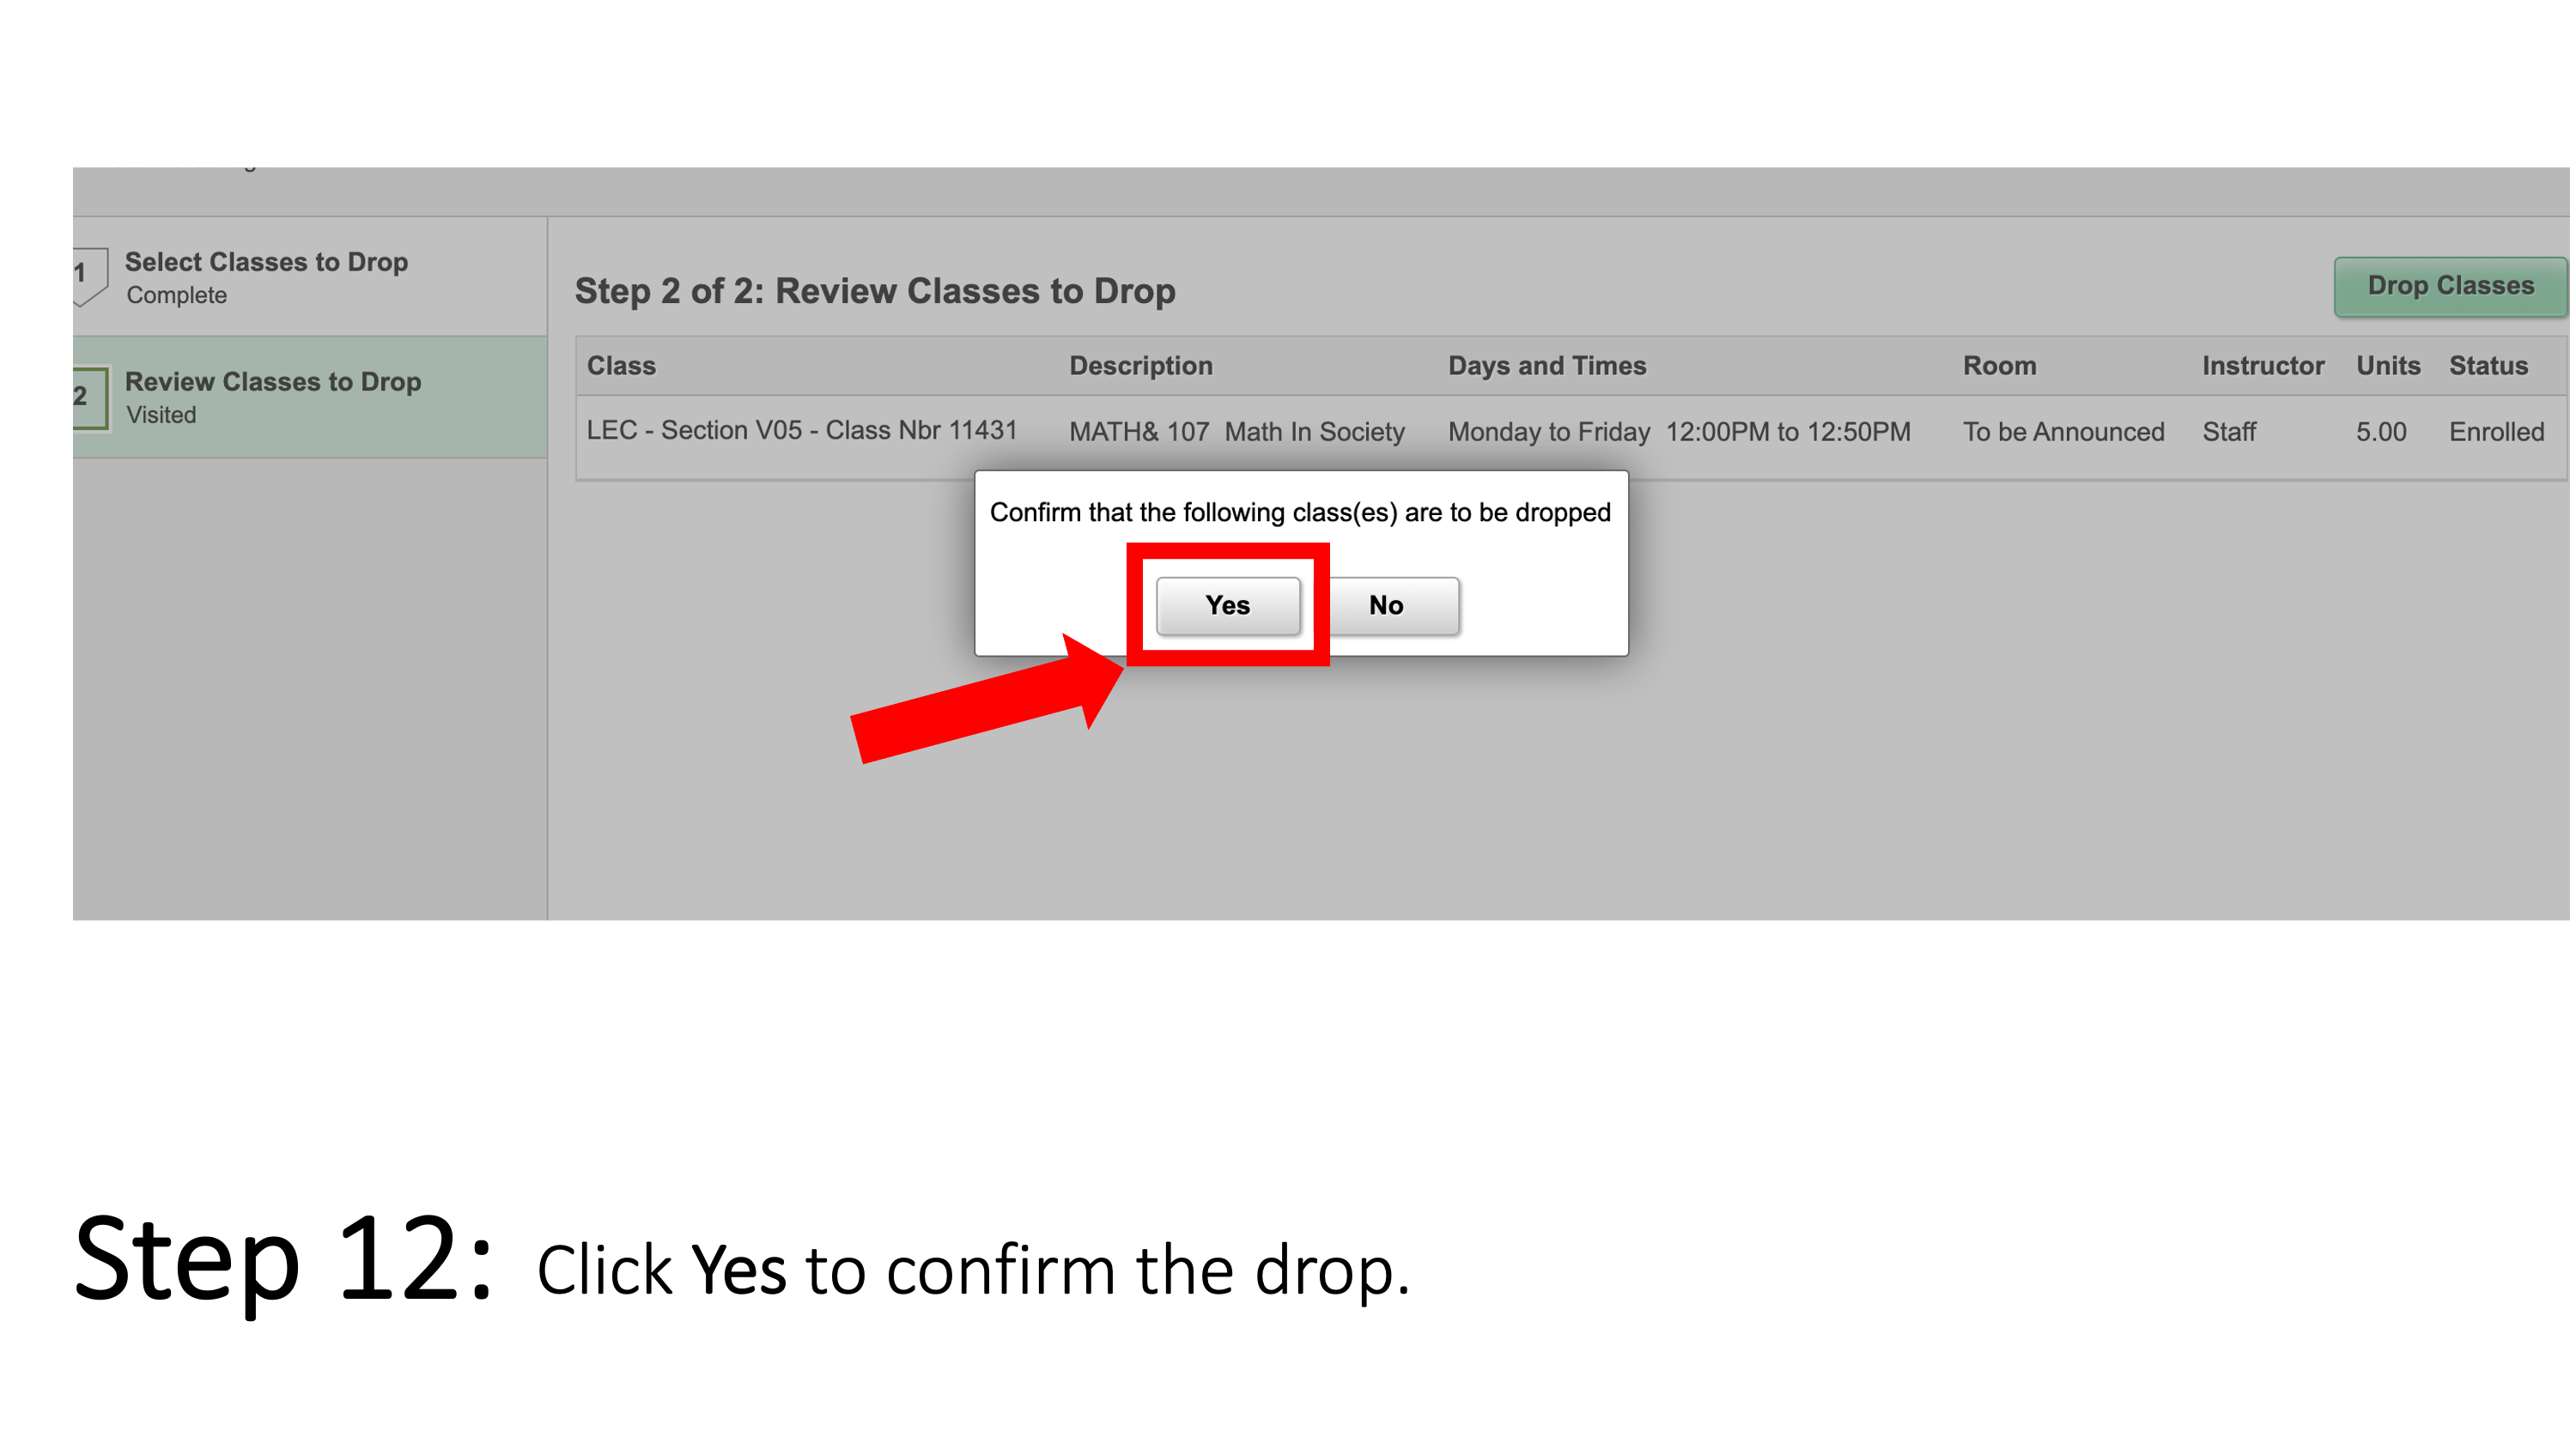 Click Yes to confirm the drop.